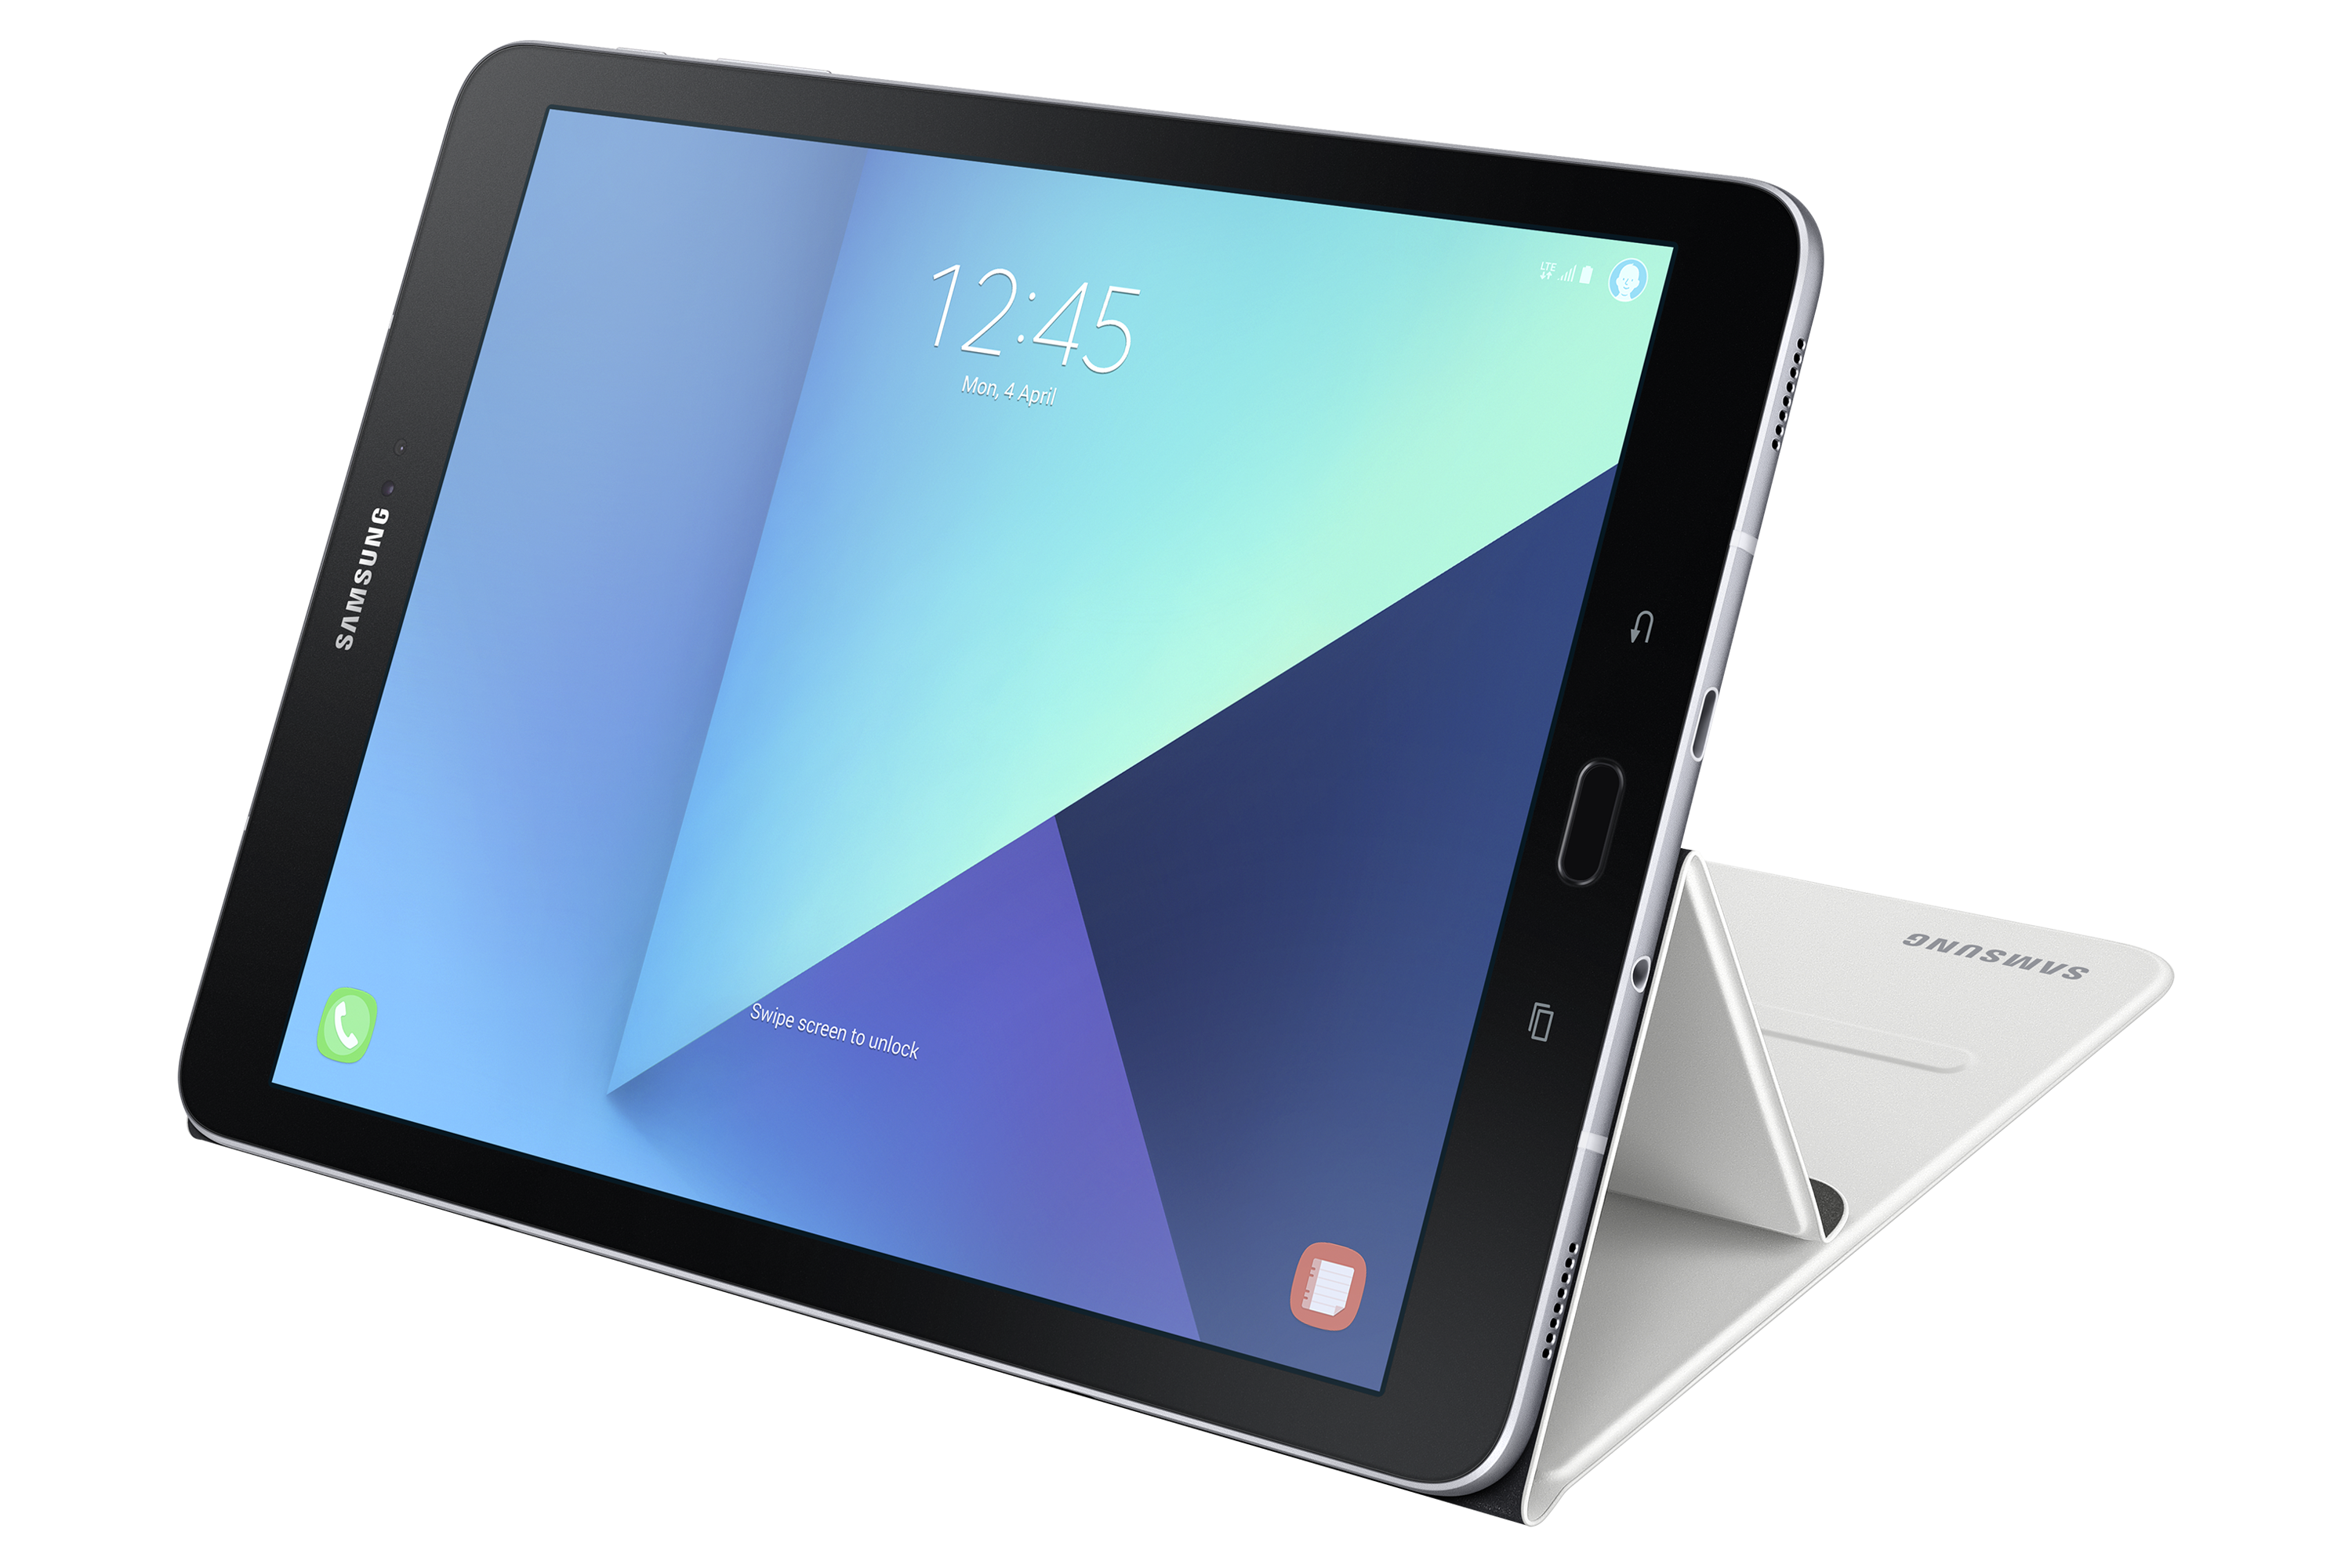 Samsung Launches the 9.7-inch Galaxy Tab S3: Snapdragon 820 with